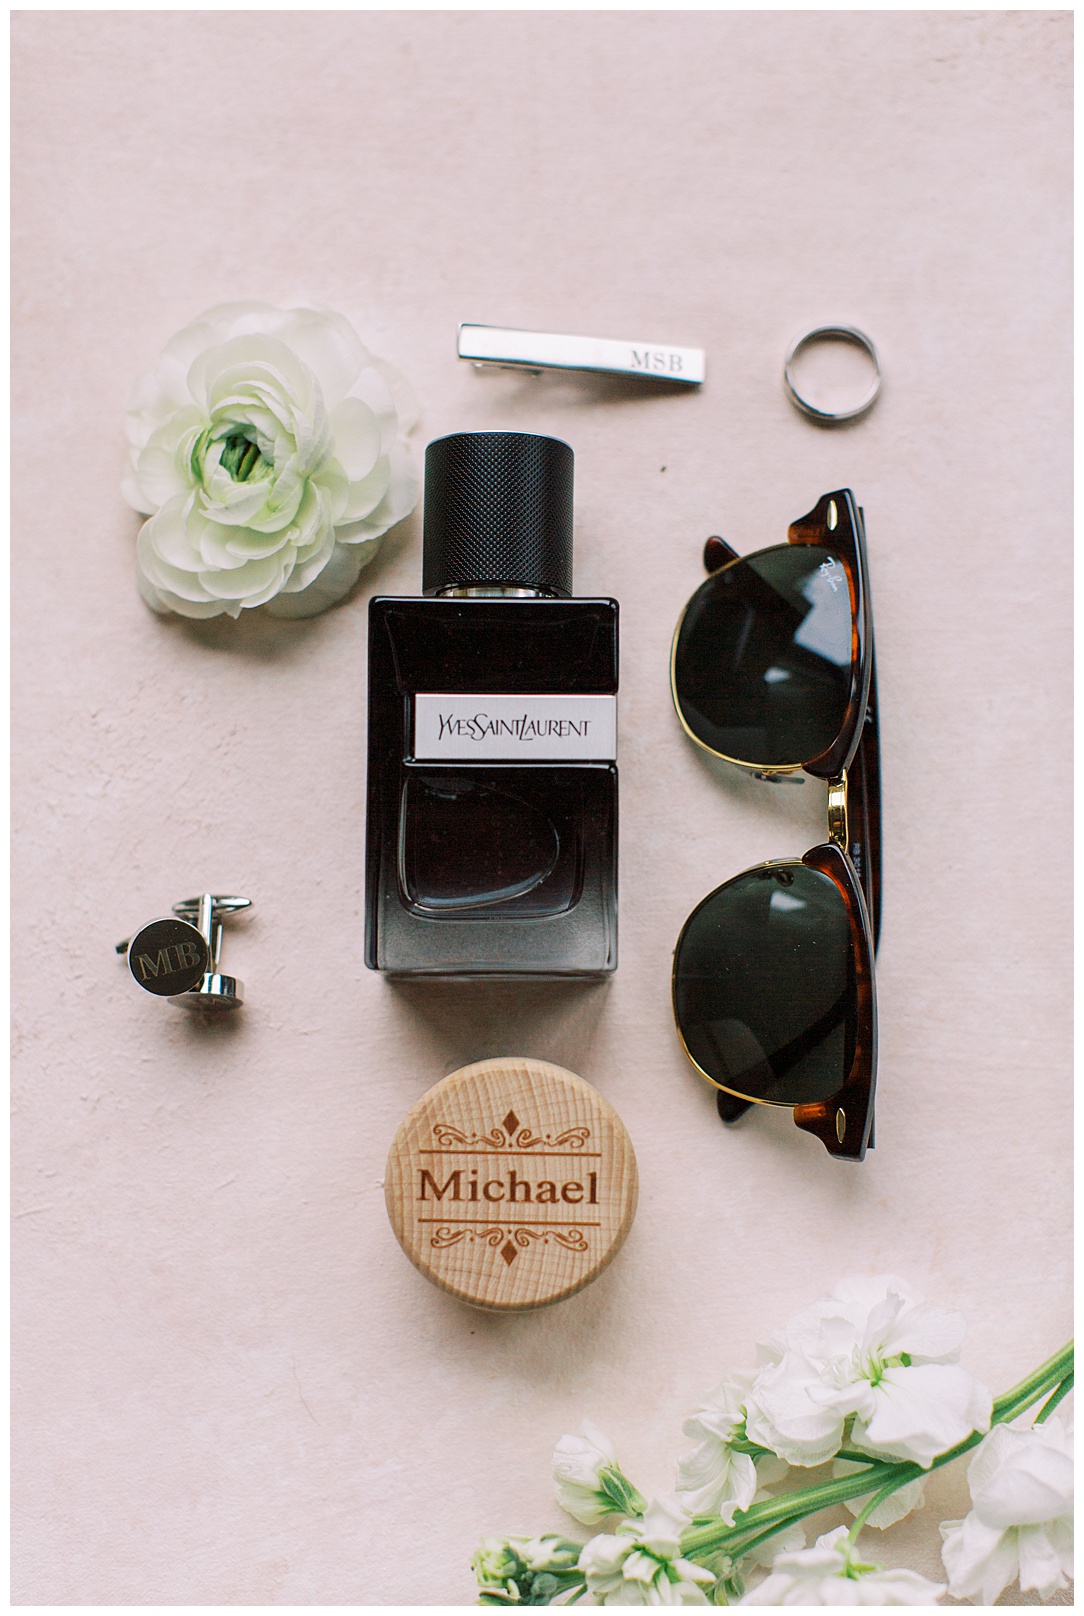 YSL Cologne and Groom's Details - Northern Virginia Wedding Venue